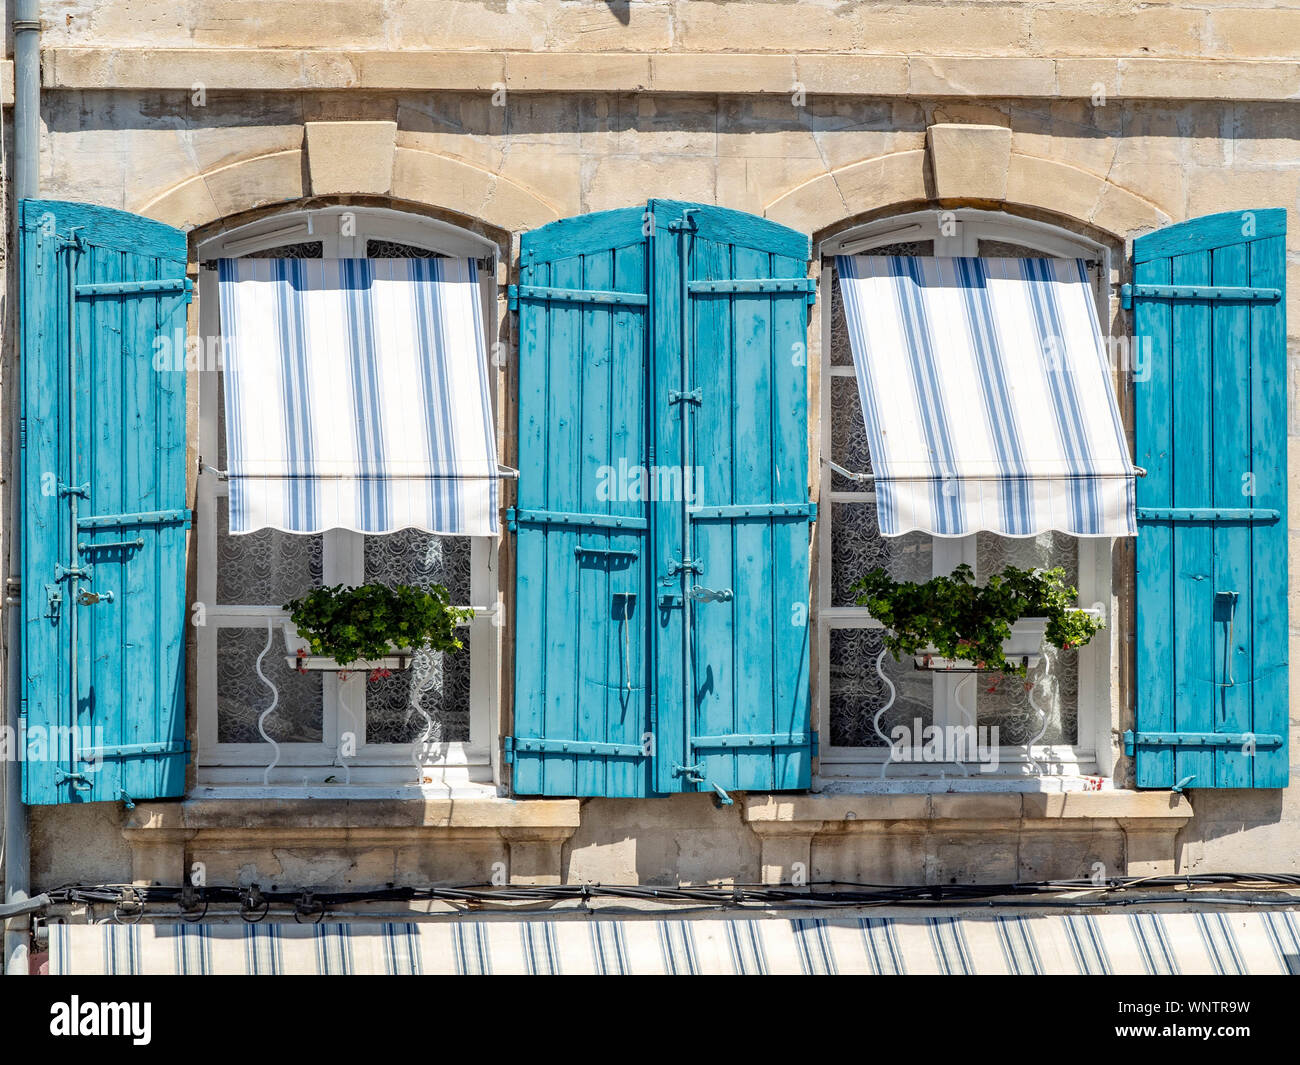 Windows framed by beautiful blue shutters and awnings. Stock Photo